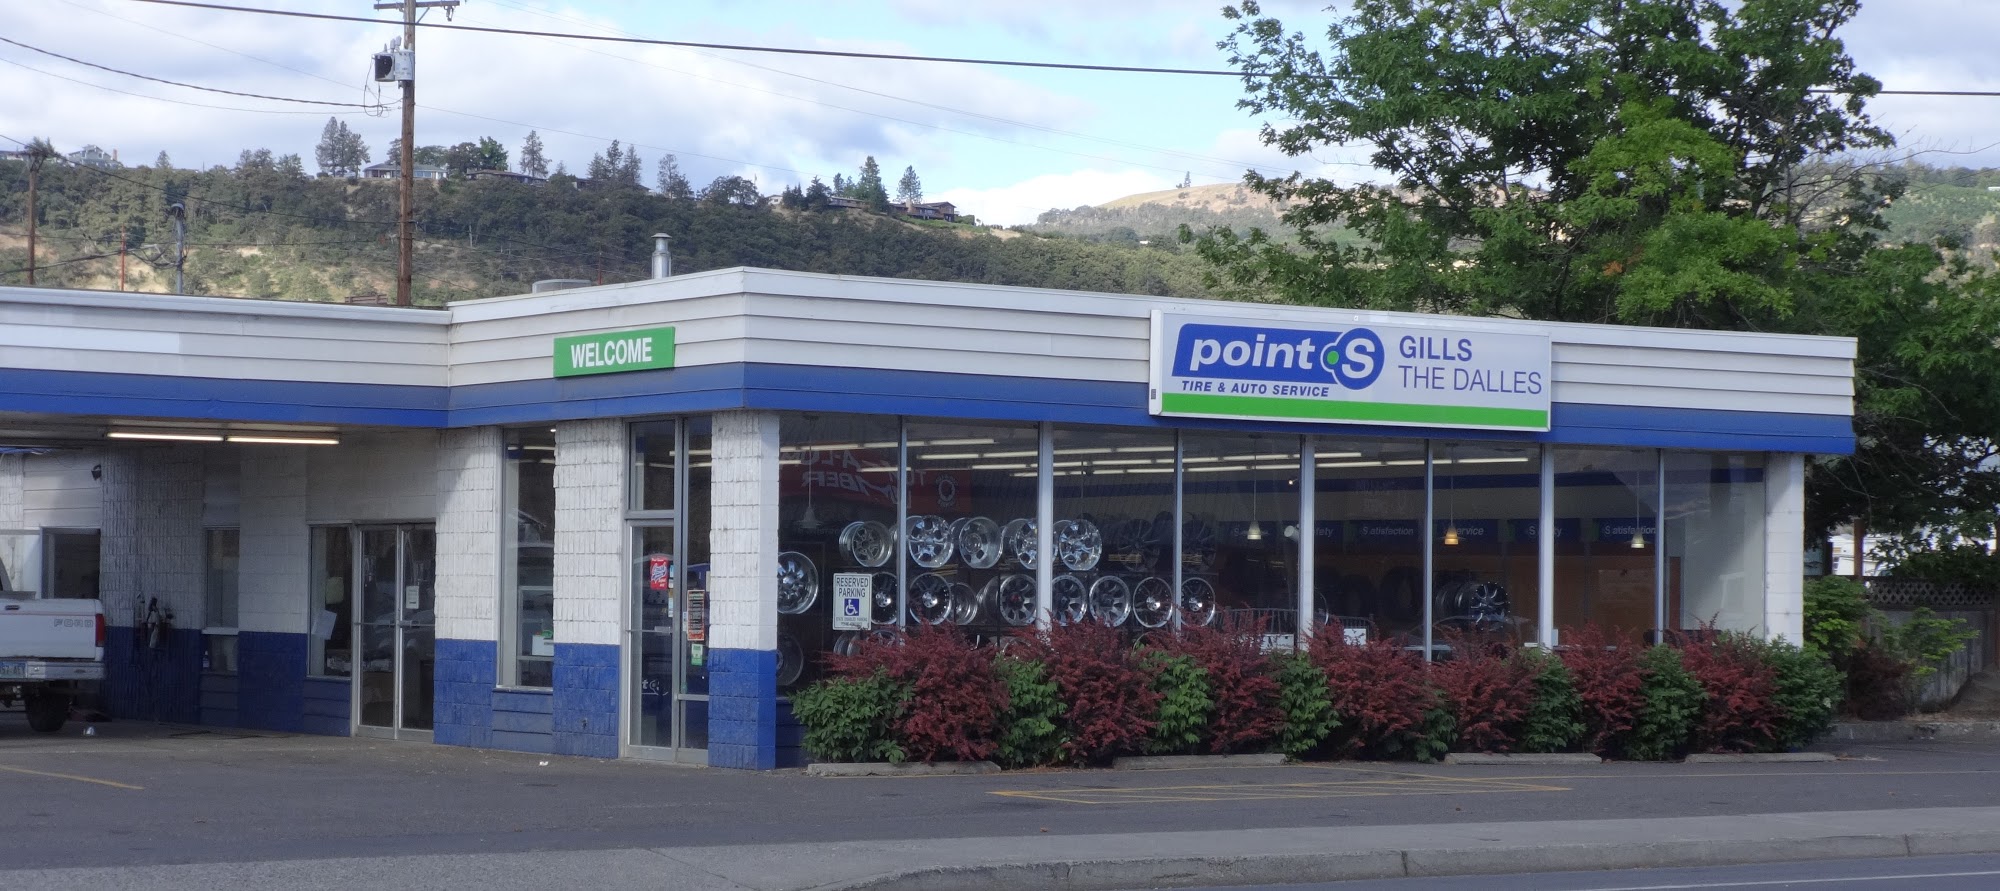 Gills Point S Tire & Auto - The Dalles